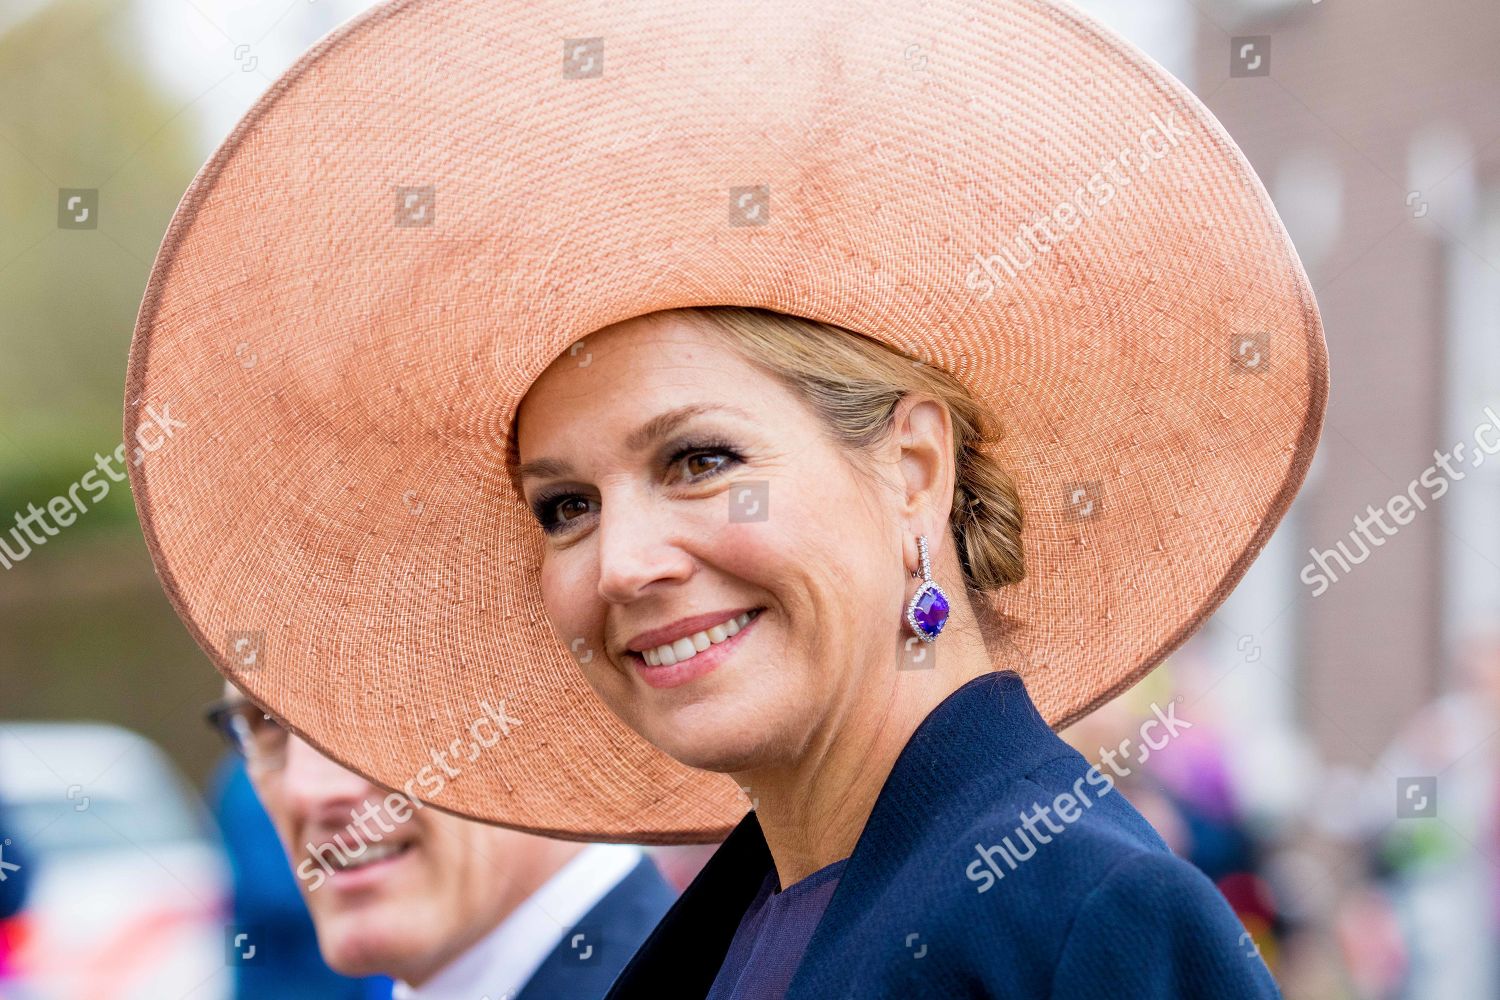 CASA REAL HOLANDESA - Página 69 Queen-maxima-visit-to-the-bavaria-brewery-lieshout-netherlands-shutterstock-editorial-10180868aa